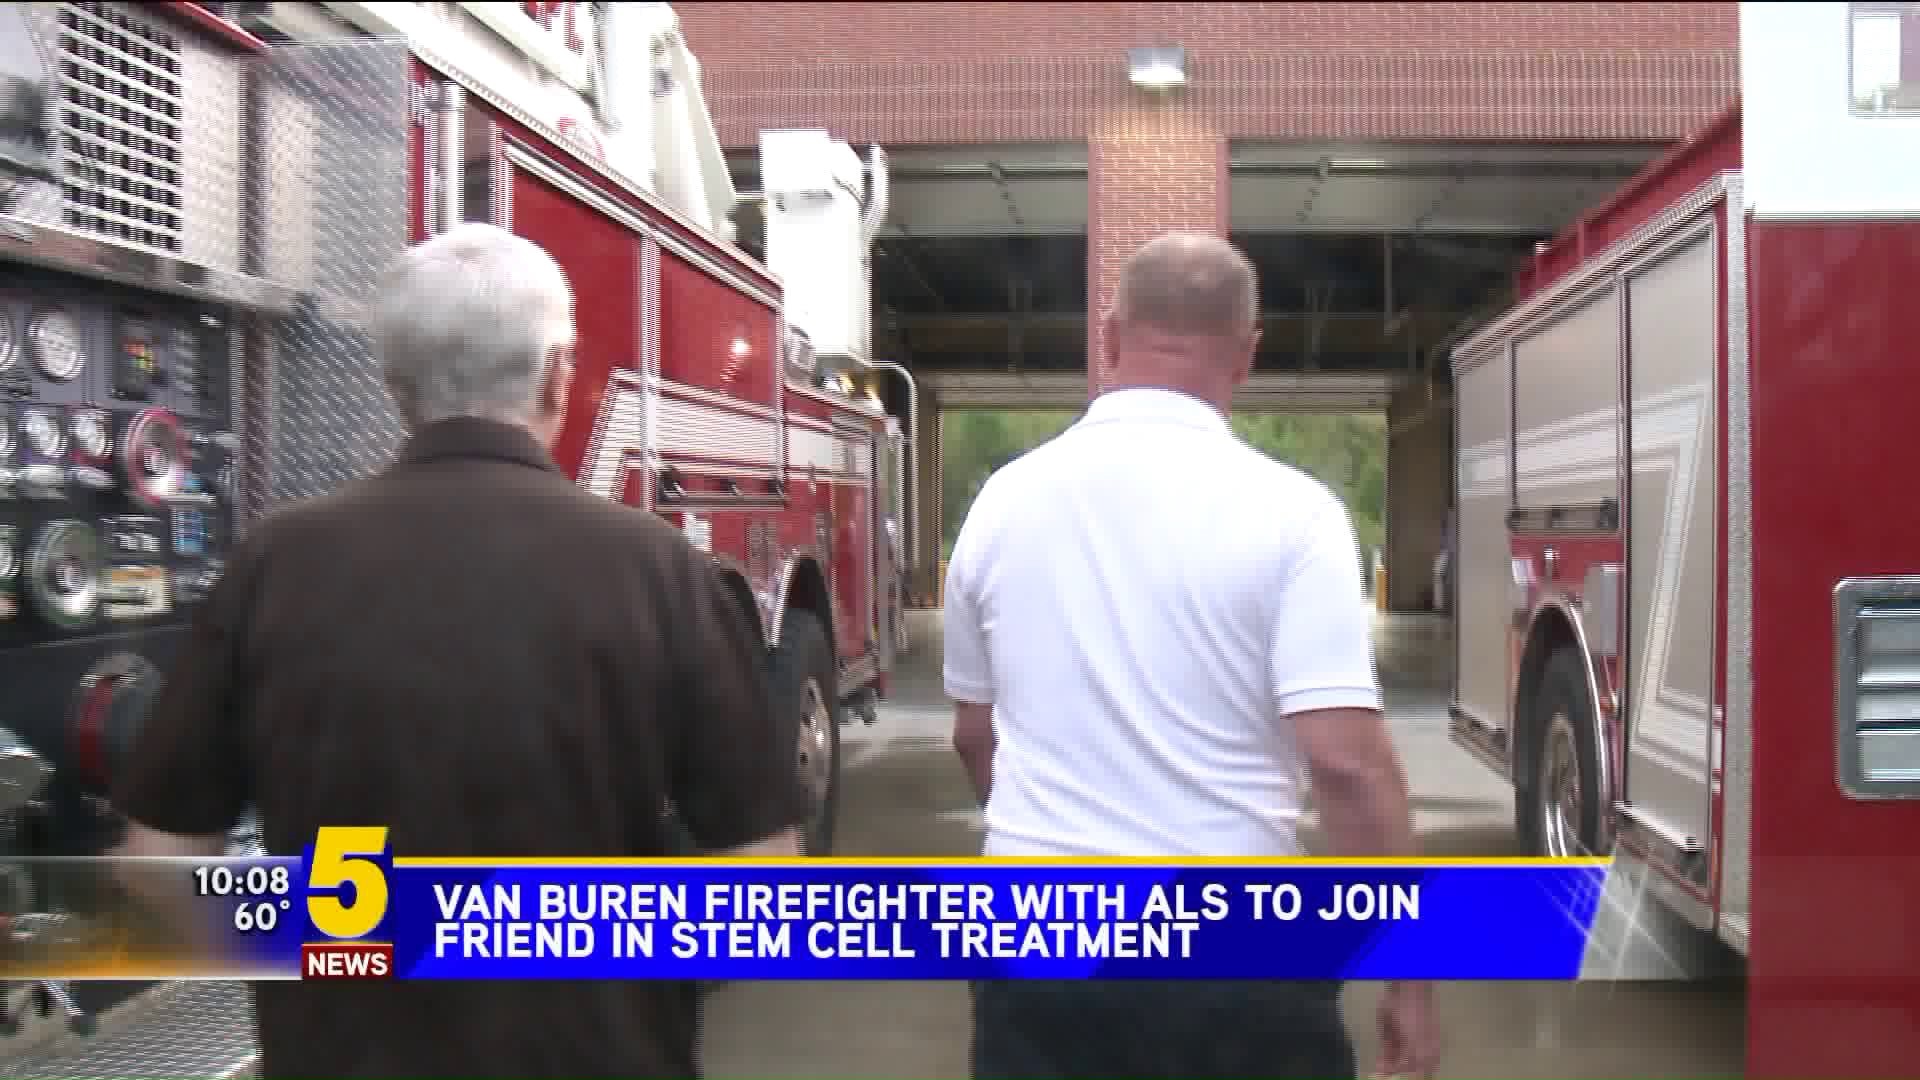 FIREFIGHTER TO JOIN ALS TREATMENT